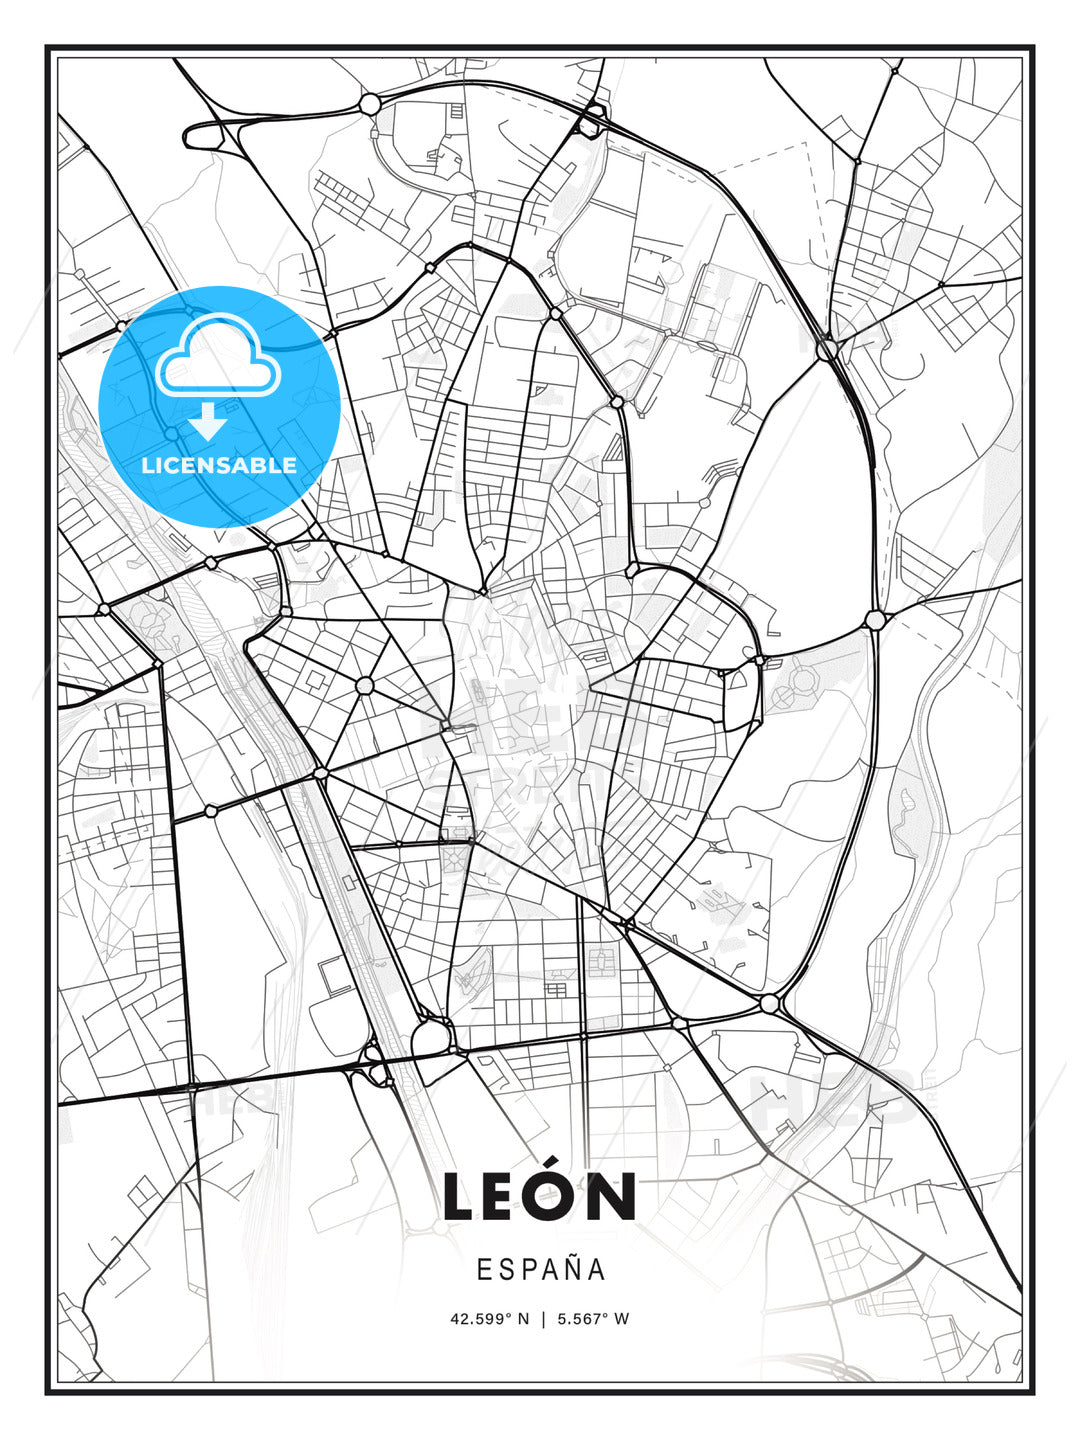 León, Spain, Modern Print Template in Various Formats - HEBSTREITS Sketches